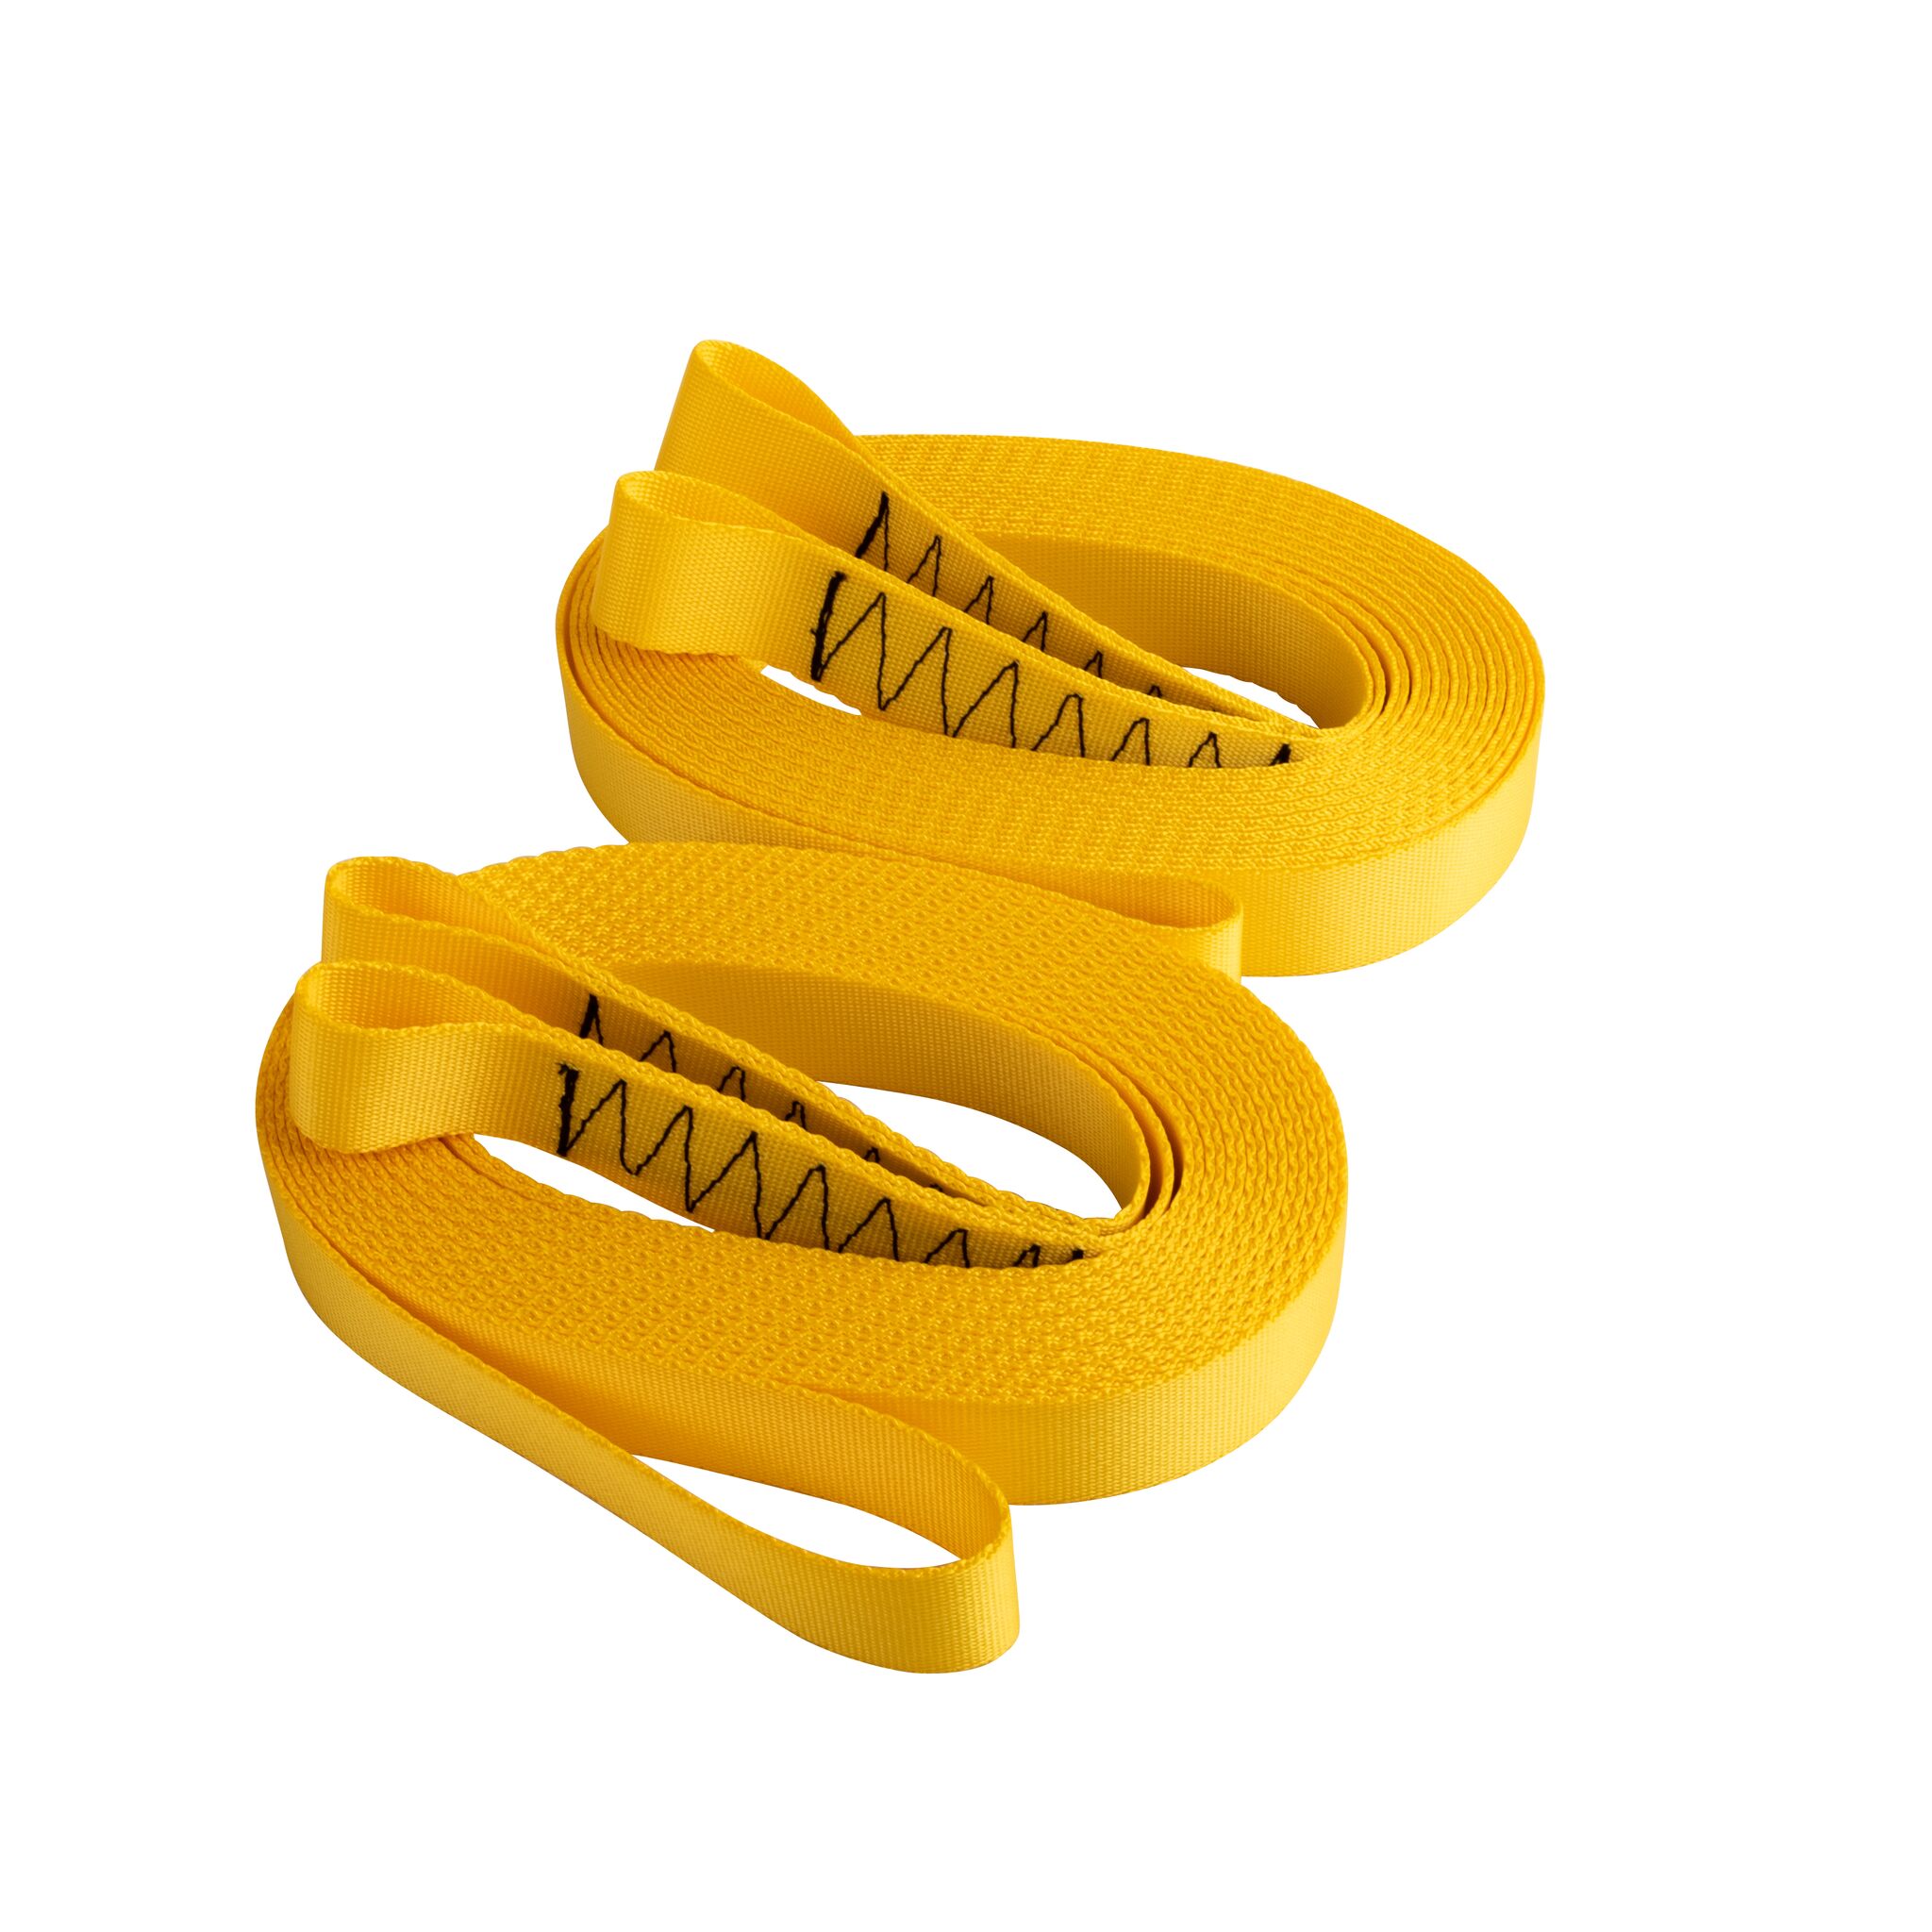 PLASTIMO Stretch rope - safety tape for lifelines